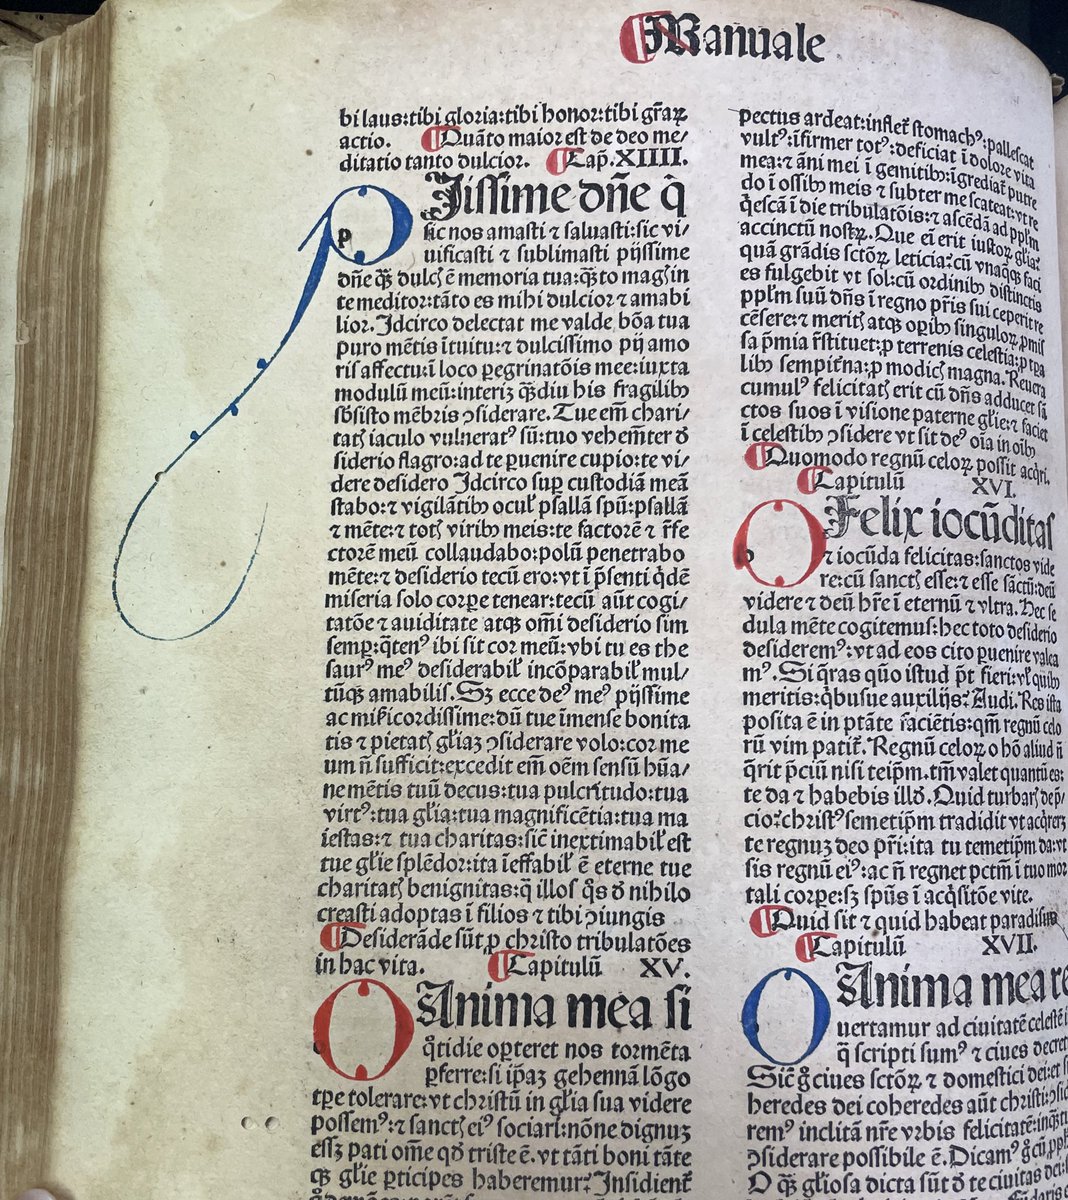 A whole lotta book history here in this stunning beauty of an #incunable in near perfect condition with intact clasps on tooled pigskin, manuscript fragments and extended initials. 

Can you spot the visible watermark? #fragmentfriday #watermark #incunabula